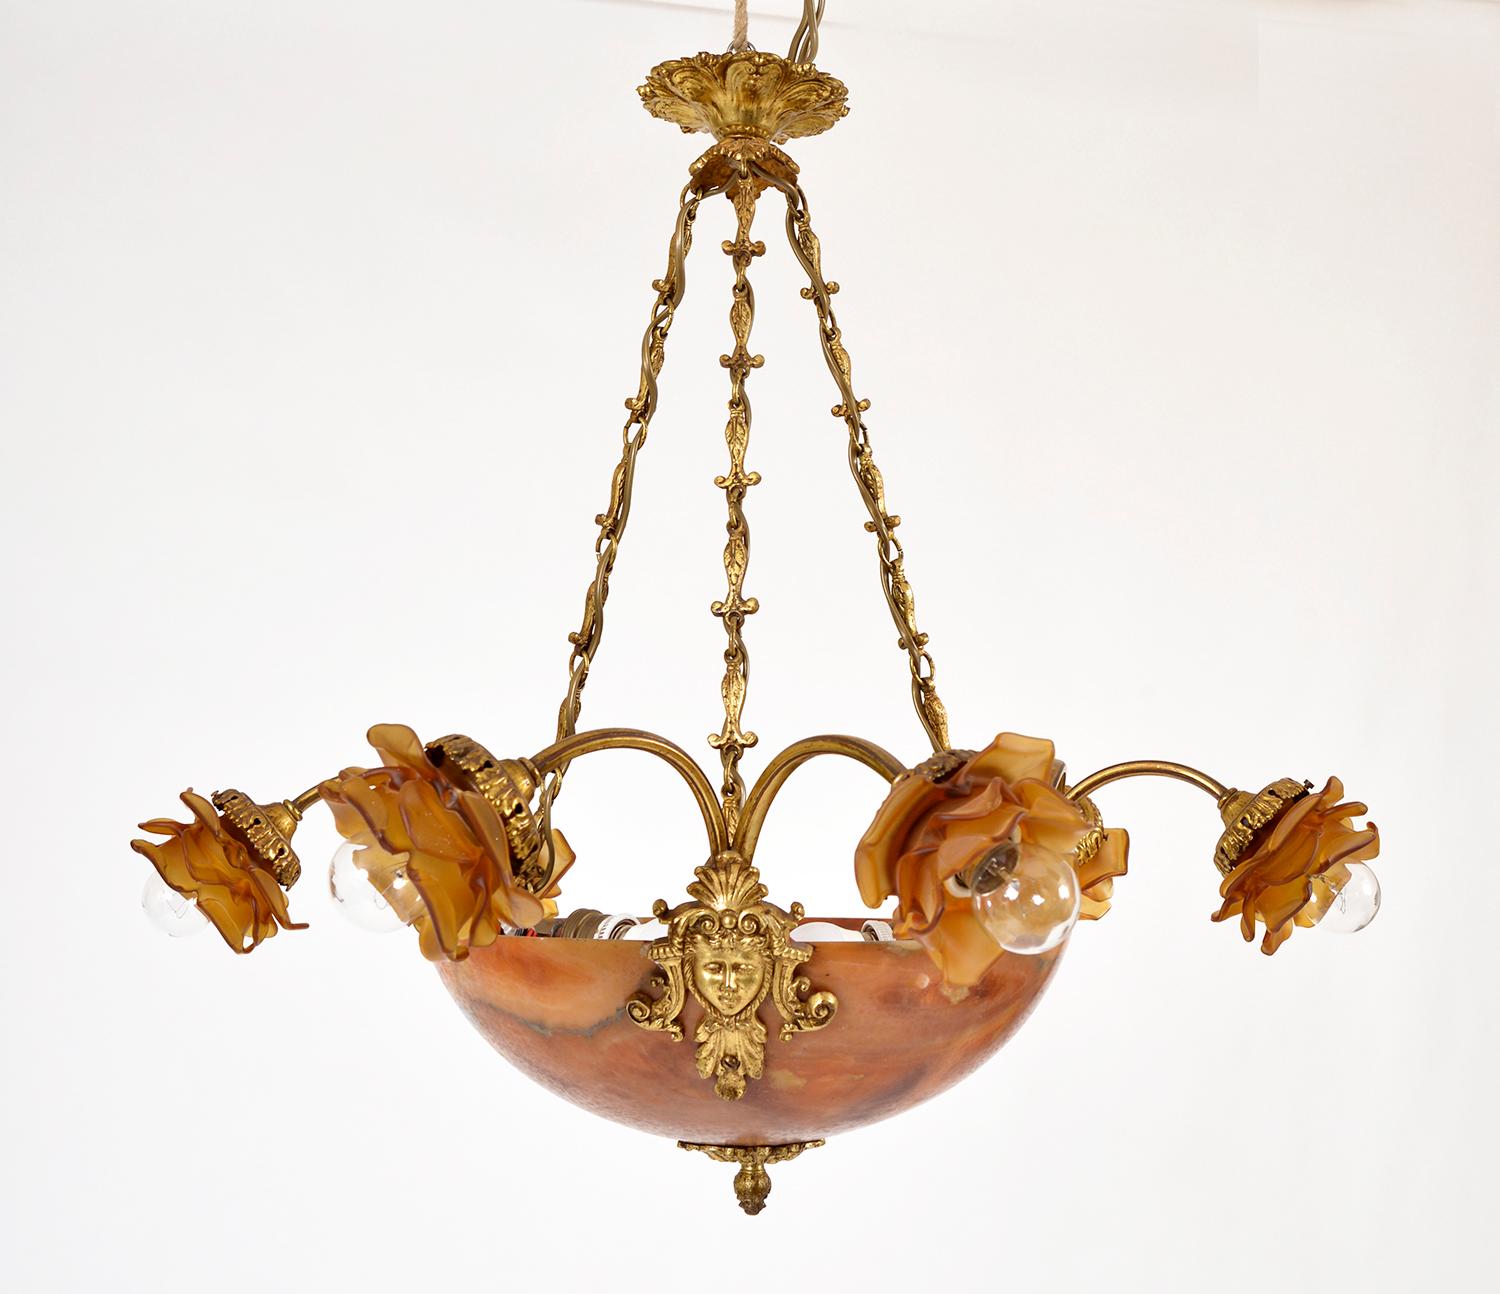 A stunning early 20th century amber alabaster chandelier on chains, featuring three highly decorative ormolu faces, from which stem six brass arms terminating in amber glass roses. The dark veined figuring in the rouge alabaster bowl is wonderful,